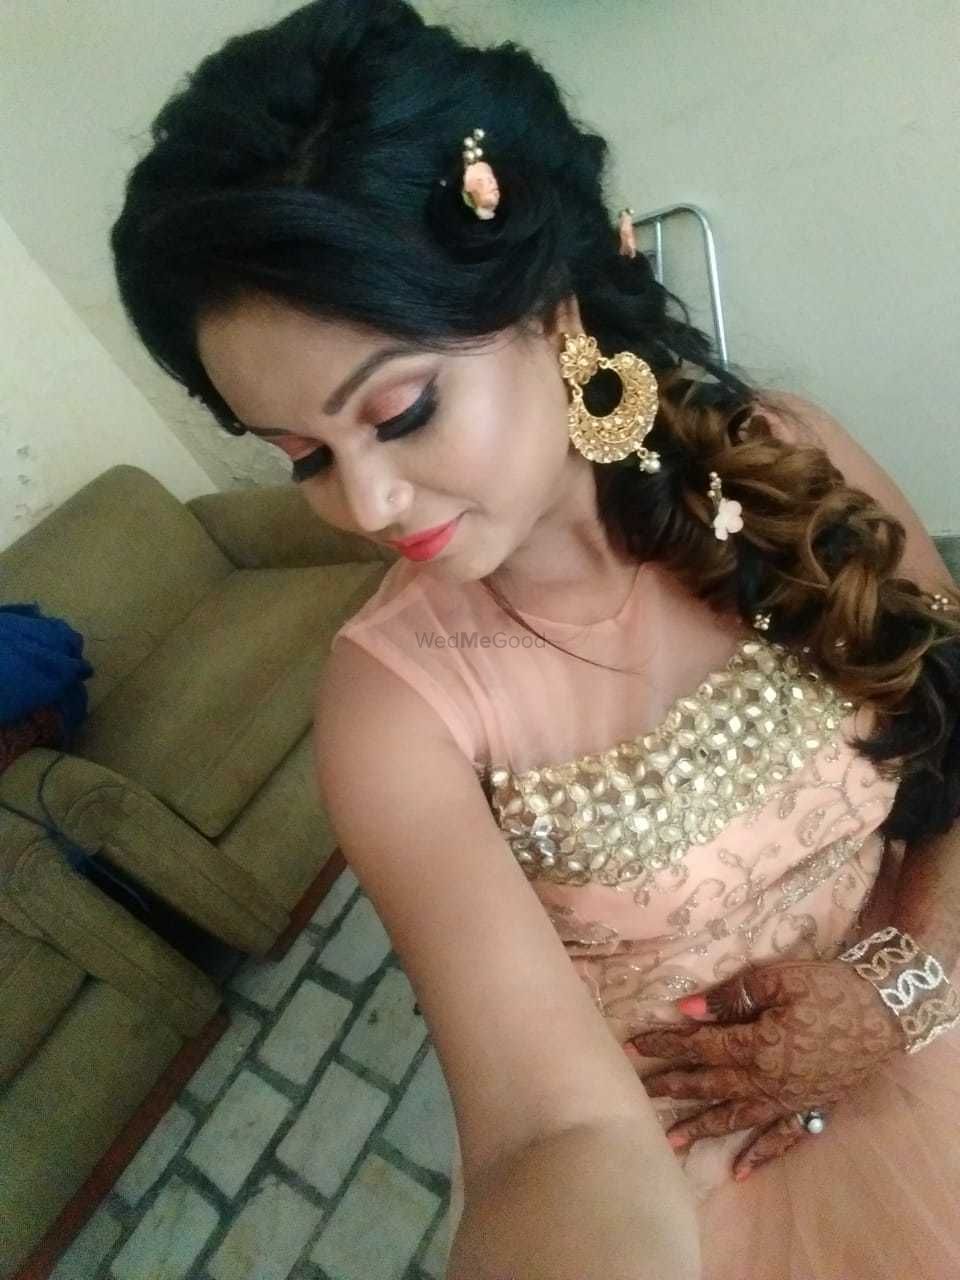 Photo By Ruhi Makeovers - Bridal Makeup